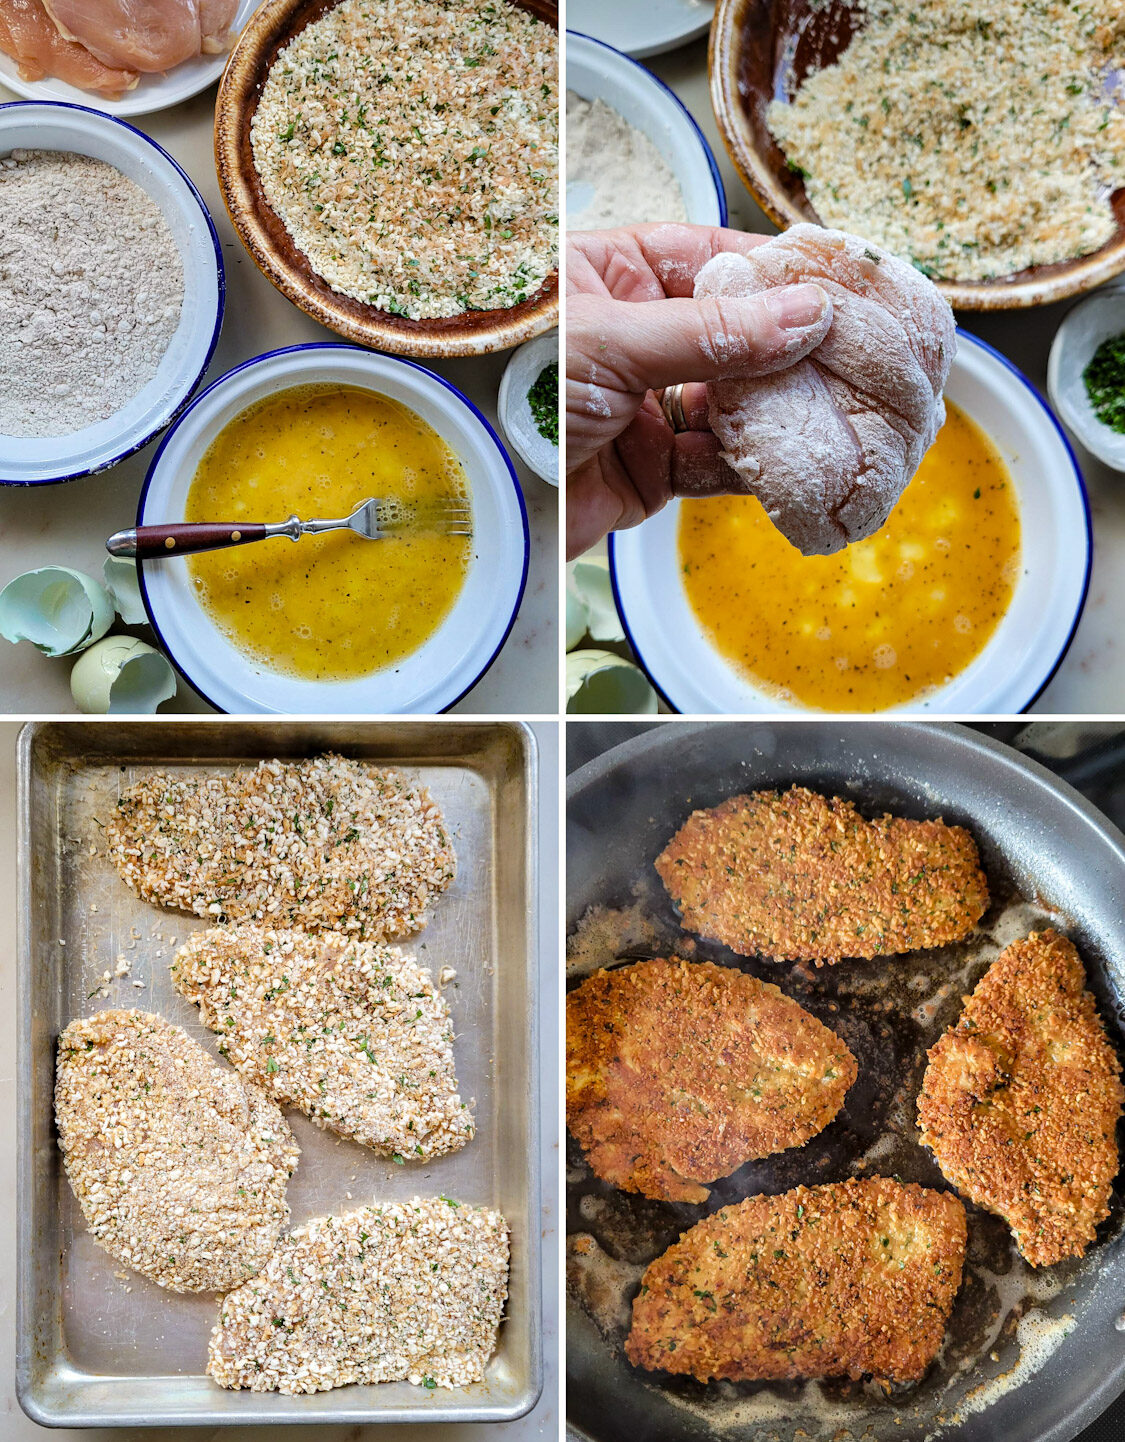 Collage showing how to bread and fry up the Parmesan Crusted Chicken for Caesar Pasta Salad.